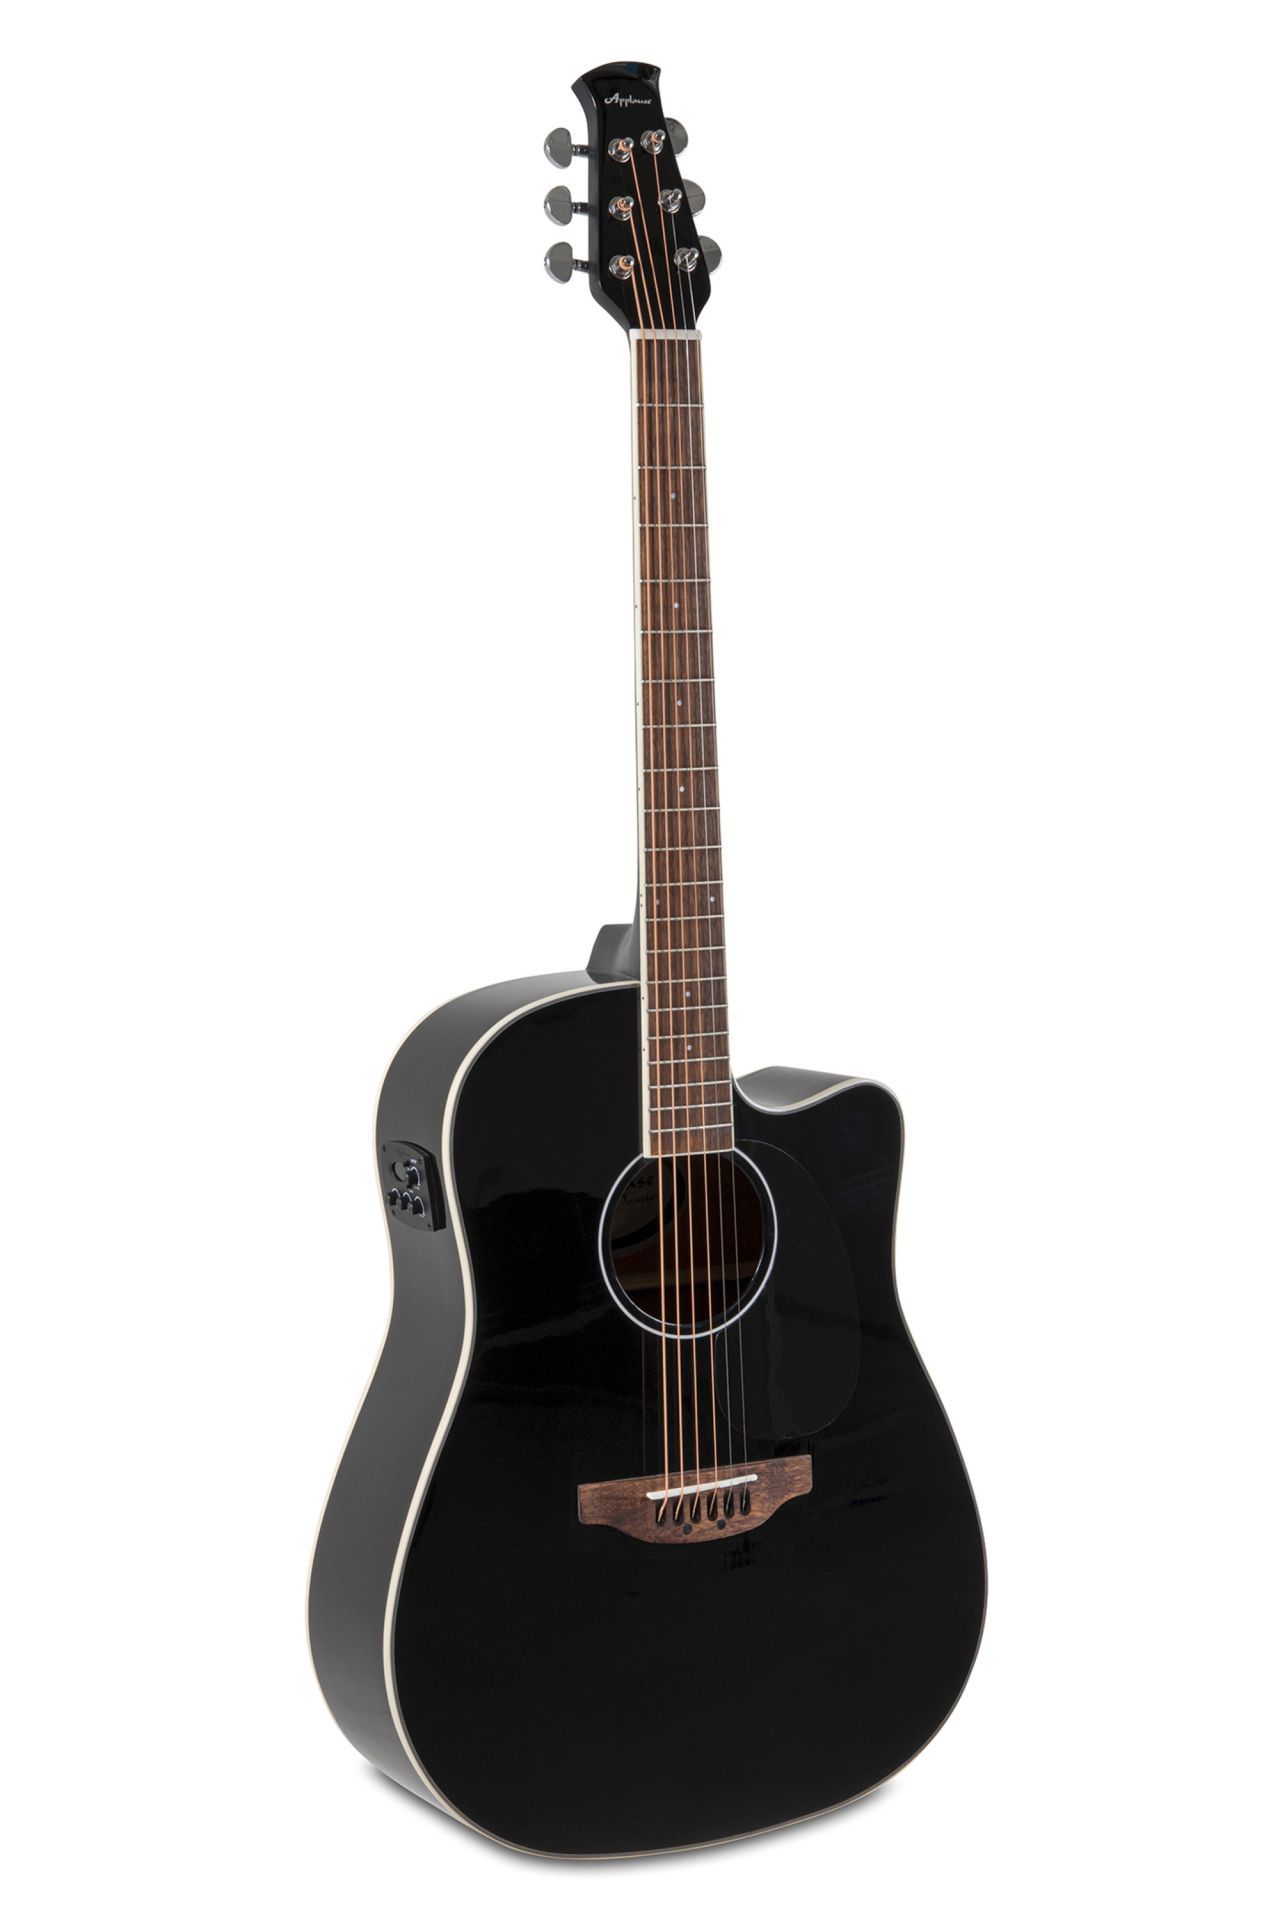 Applause By Ovation AED96-5HG Black Gloss Electro